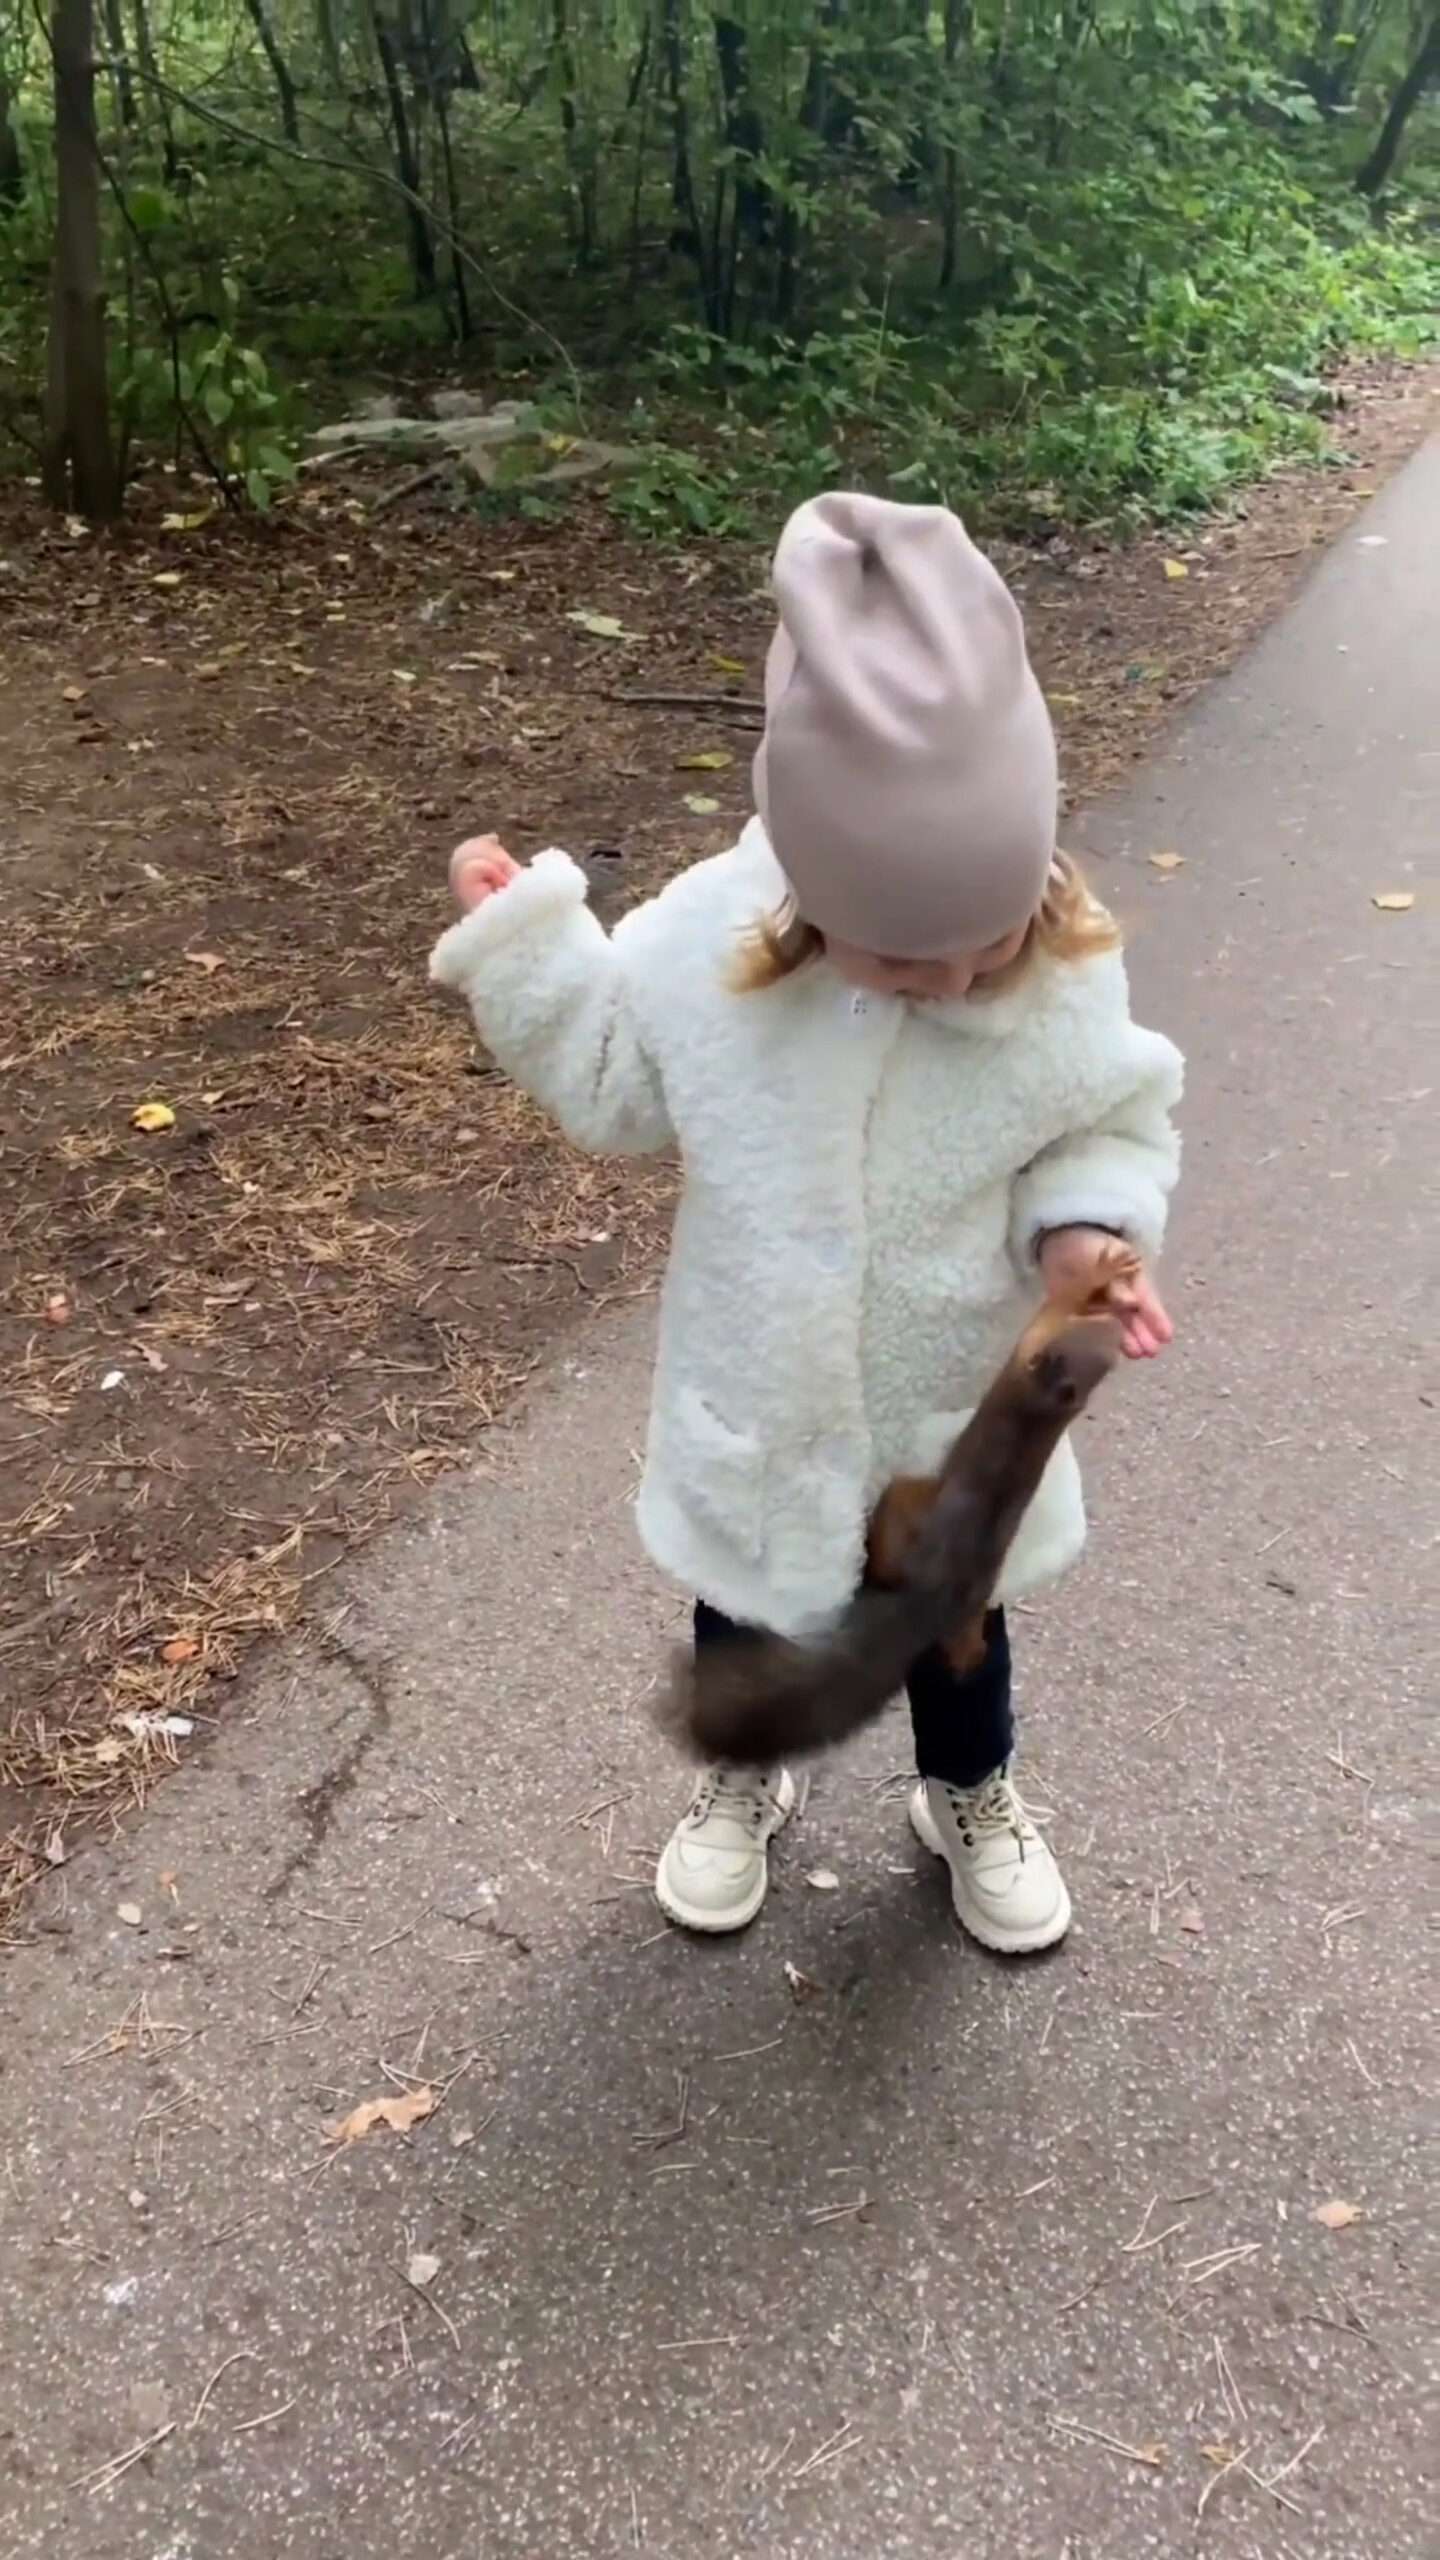 Read more about the article I’M JUST NUTTY ABOUT YOU: Adorable Three-Year-Old Girl’s Bond With Squirrel￼